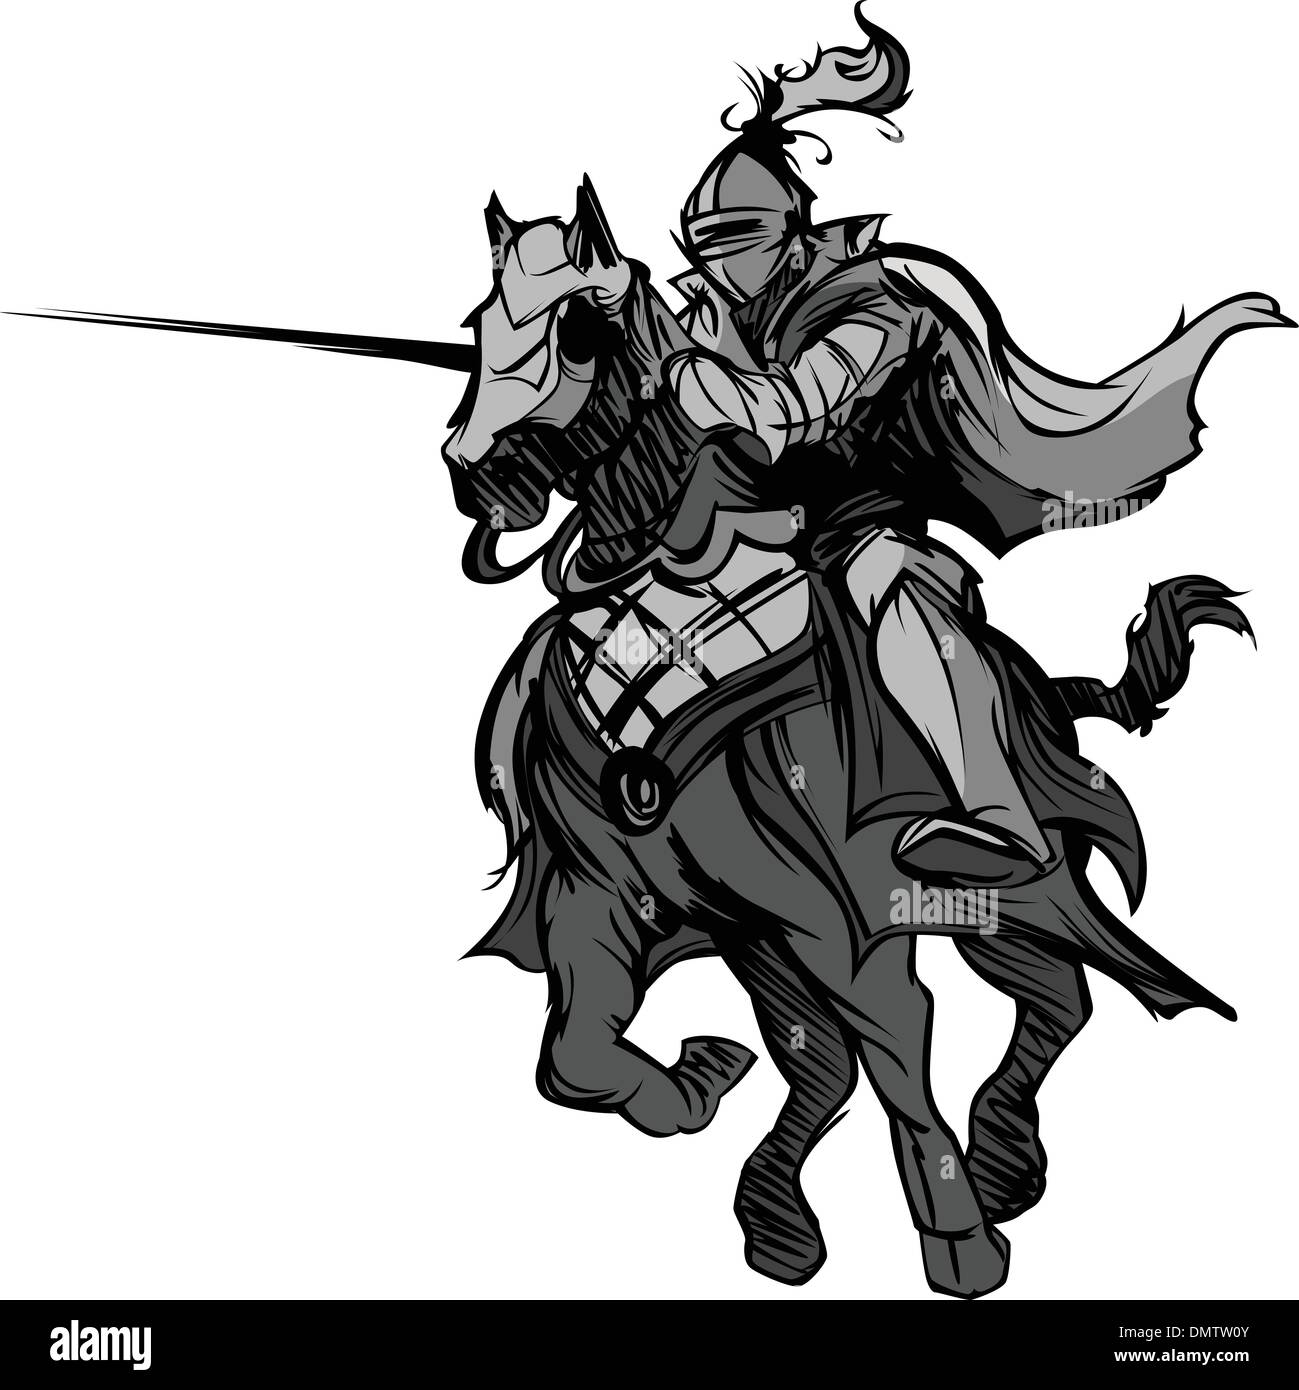 Jousting Knight Mascot on Horse Stock Vector